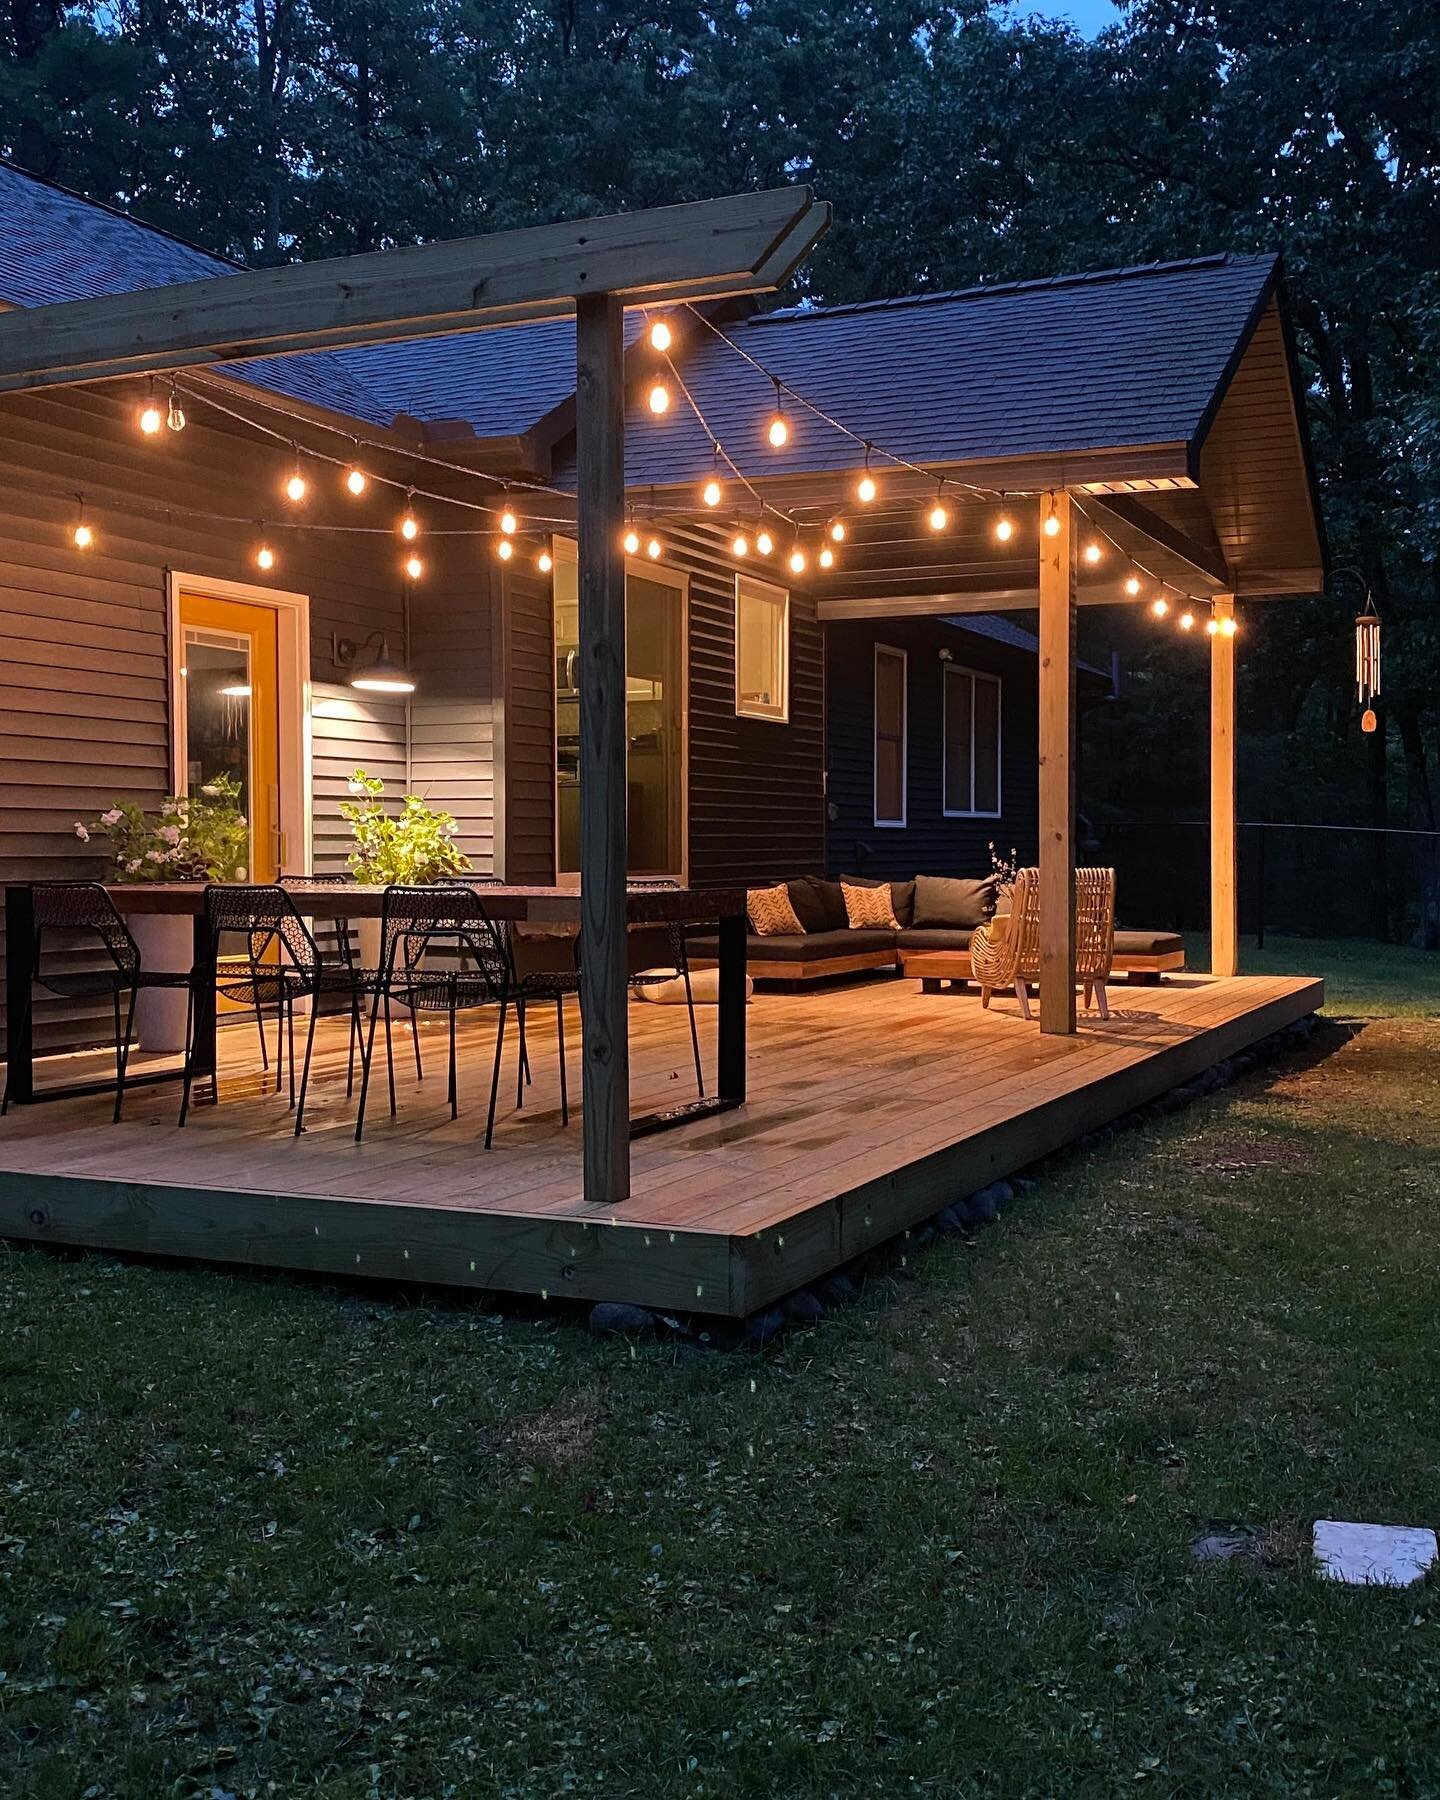 We are thrilled with the new rear deck, complete with lounge area, spacious dining for 6 - partially covered and magically lit! #catskillcompasshouse #catskillnights